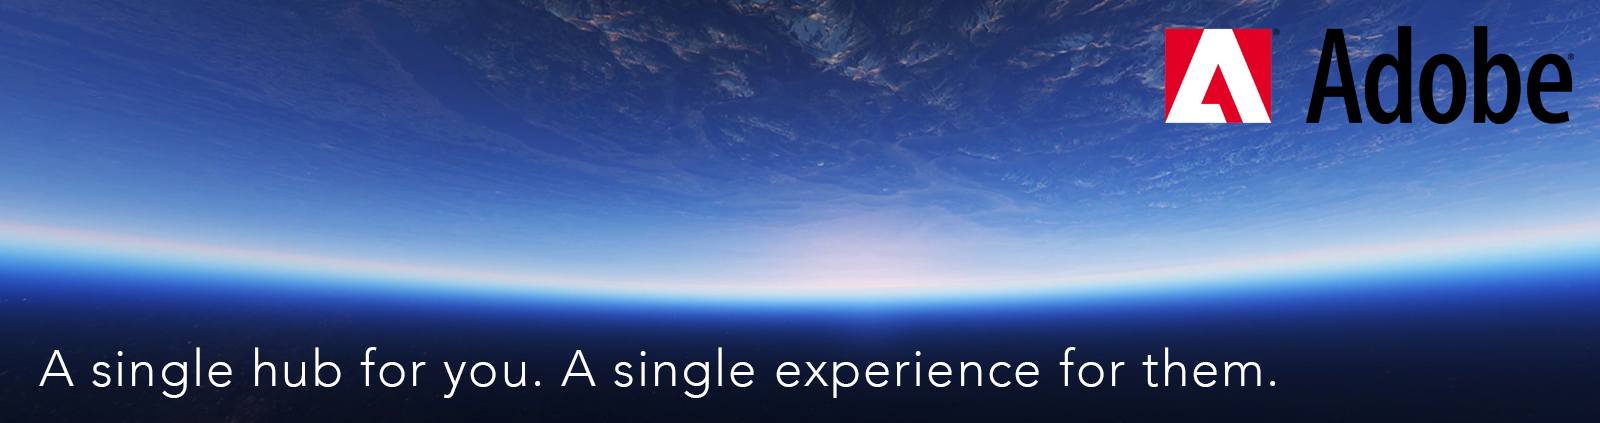 A single hub for you. A single experience for them